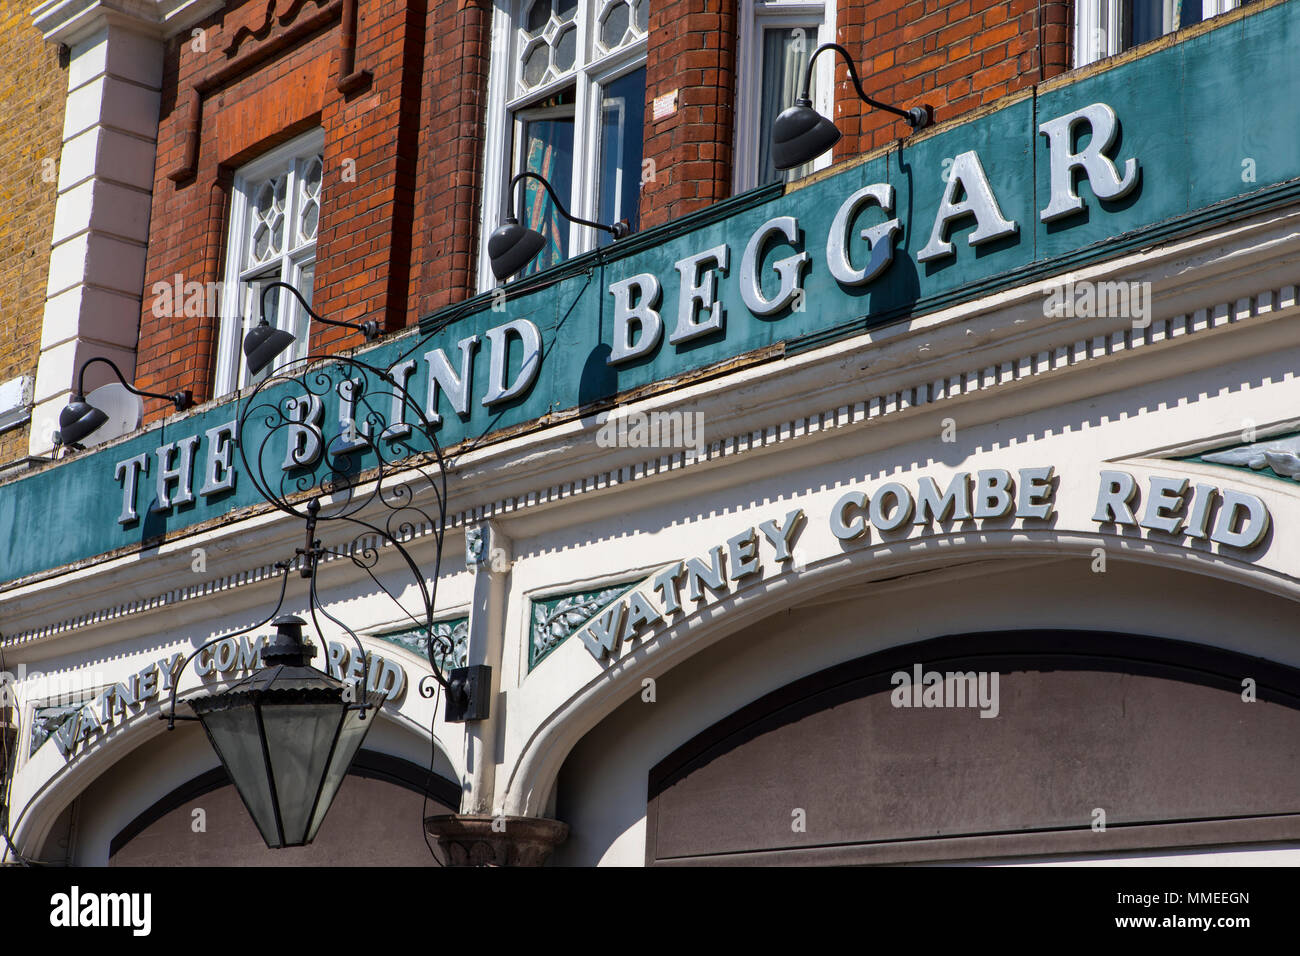 The exterior of The Blind Beggar public house on Whitechapel Road in London, UK.  The pub is known to be the location of the murder of George Cornell  Stock Photo